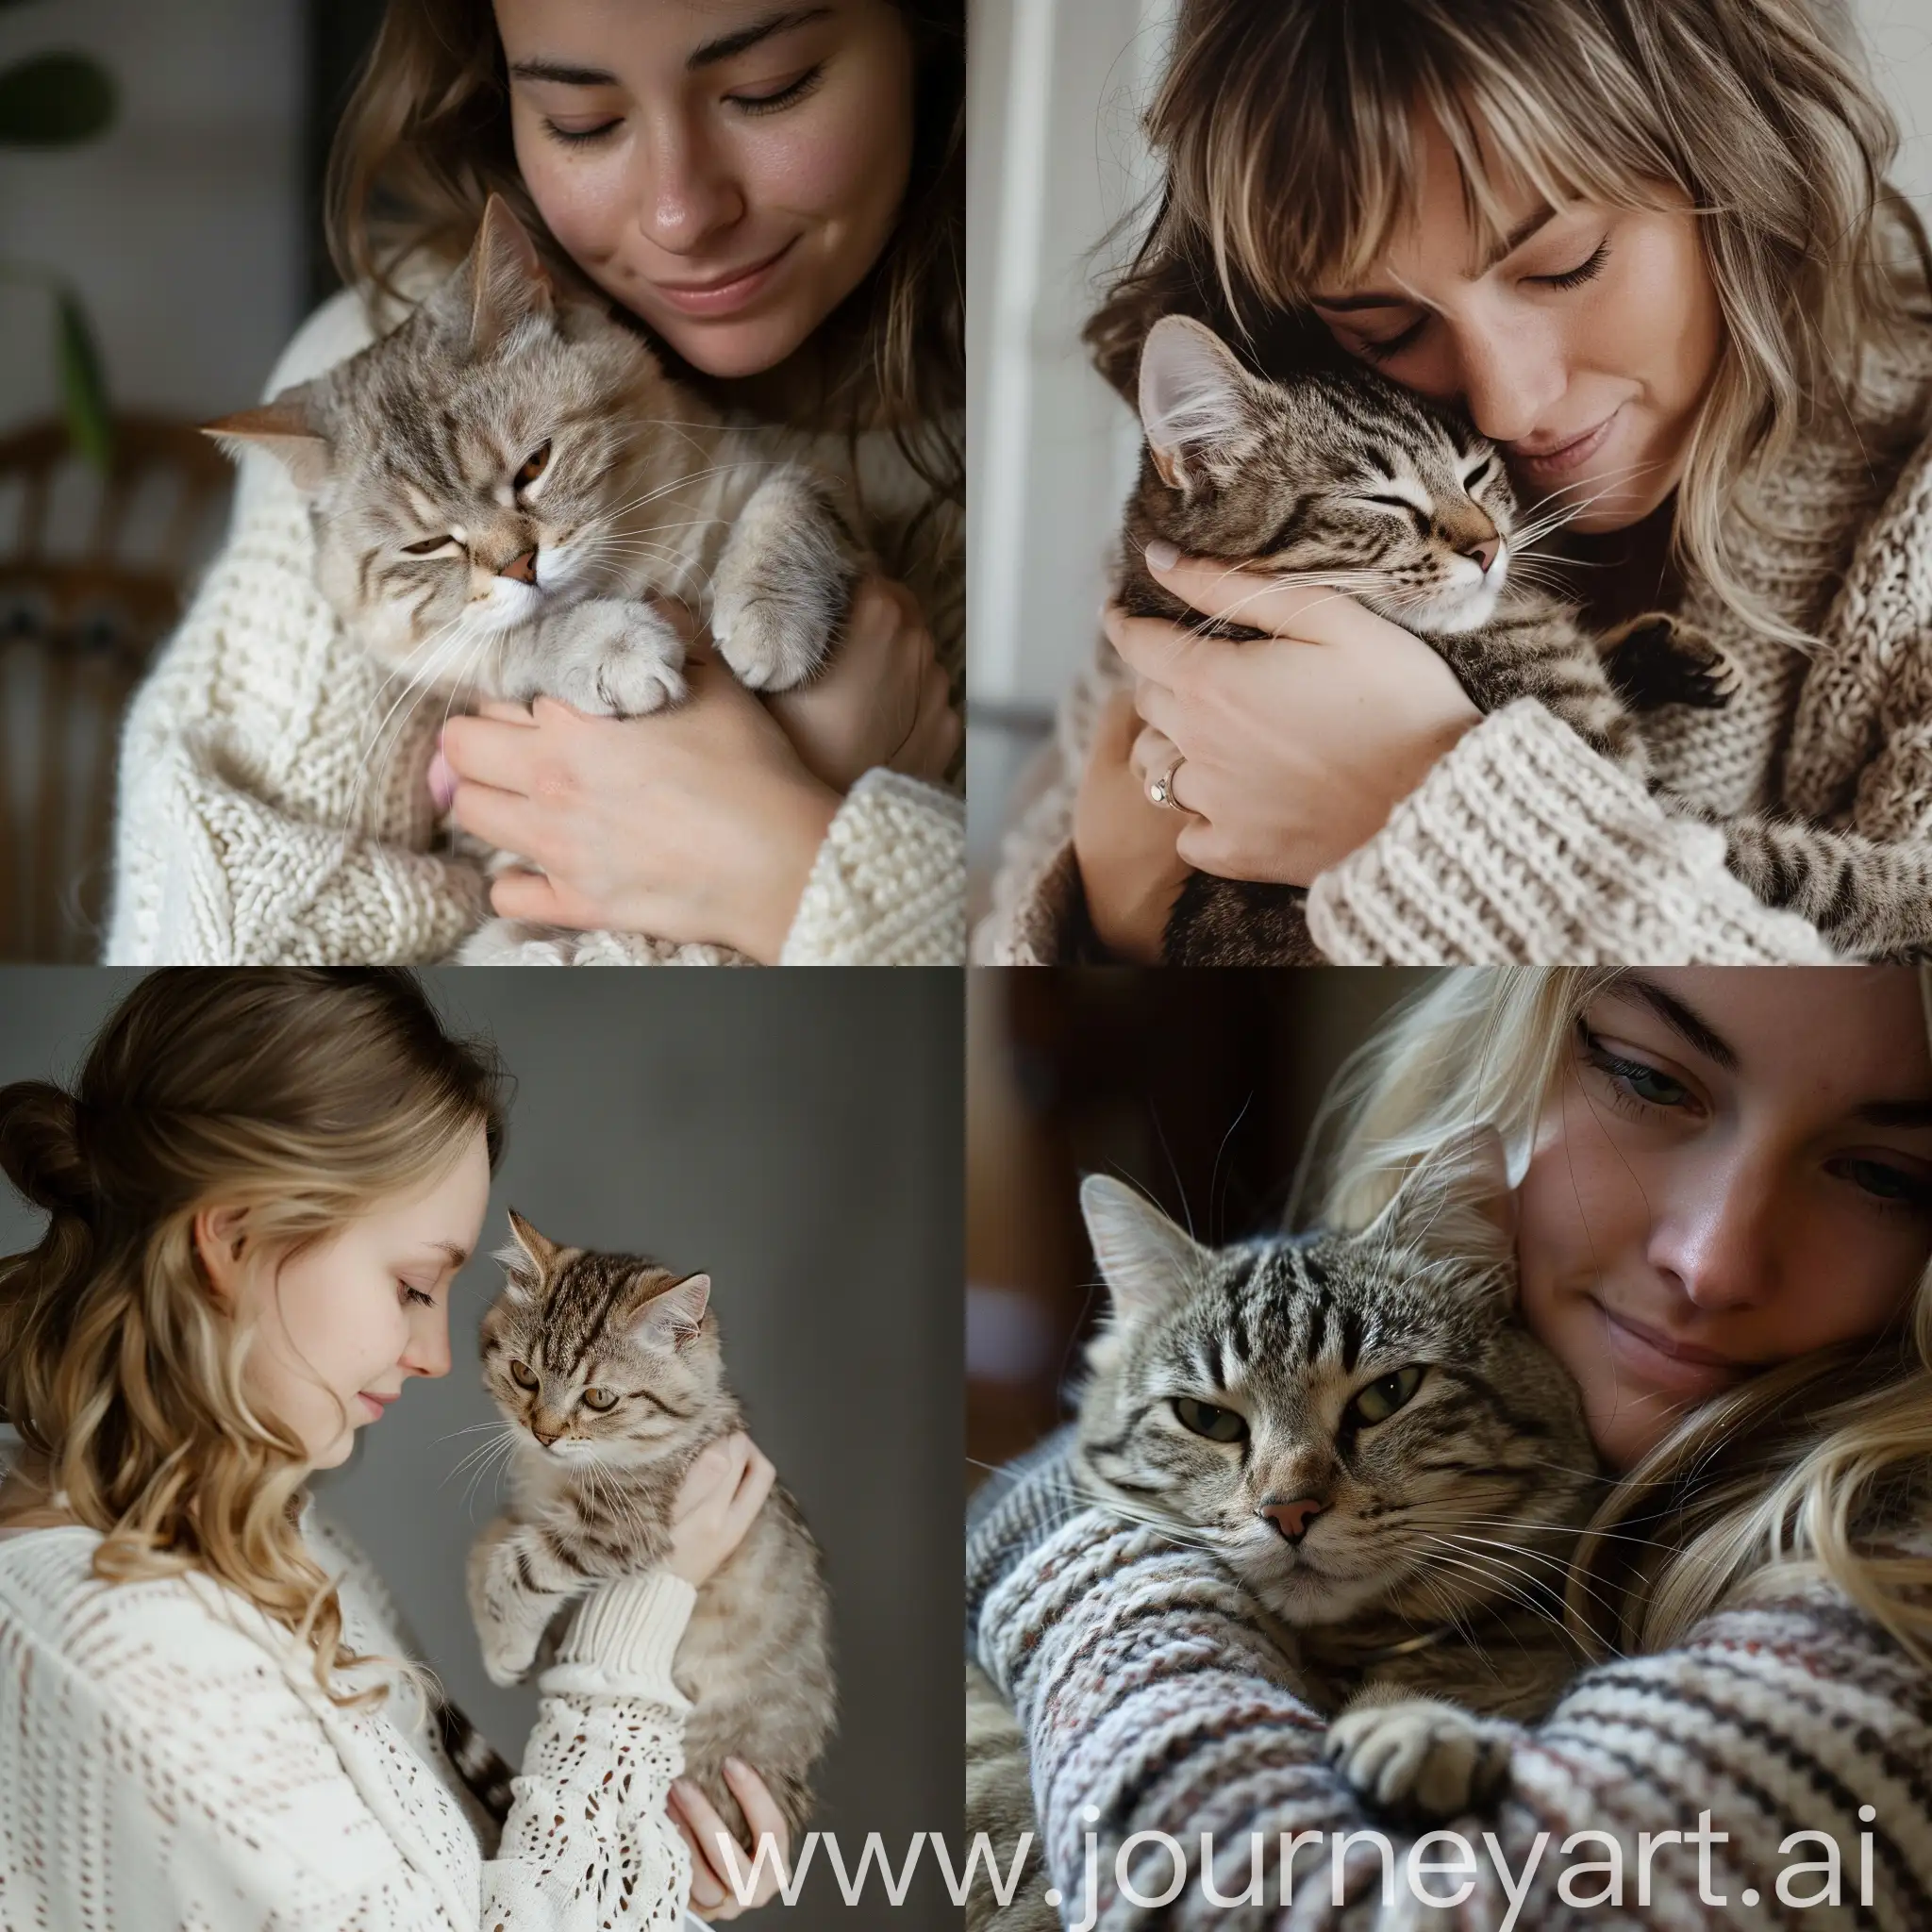 Women hold cat like a baby